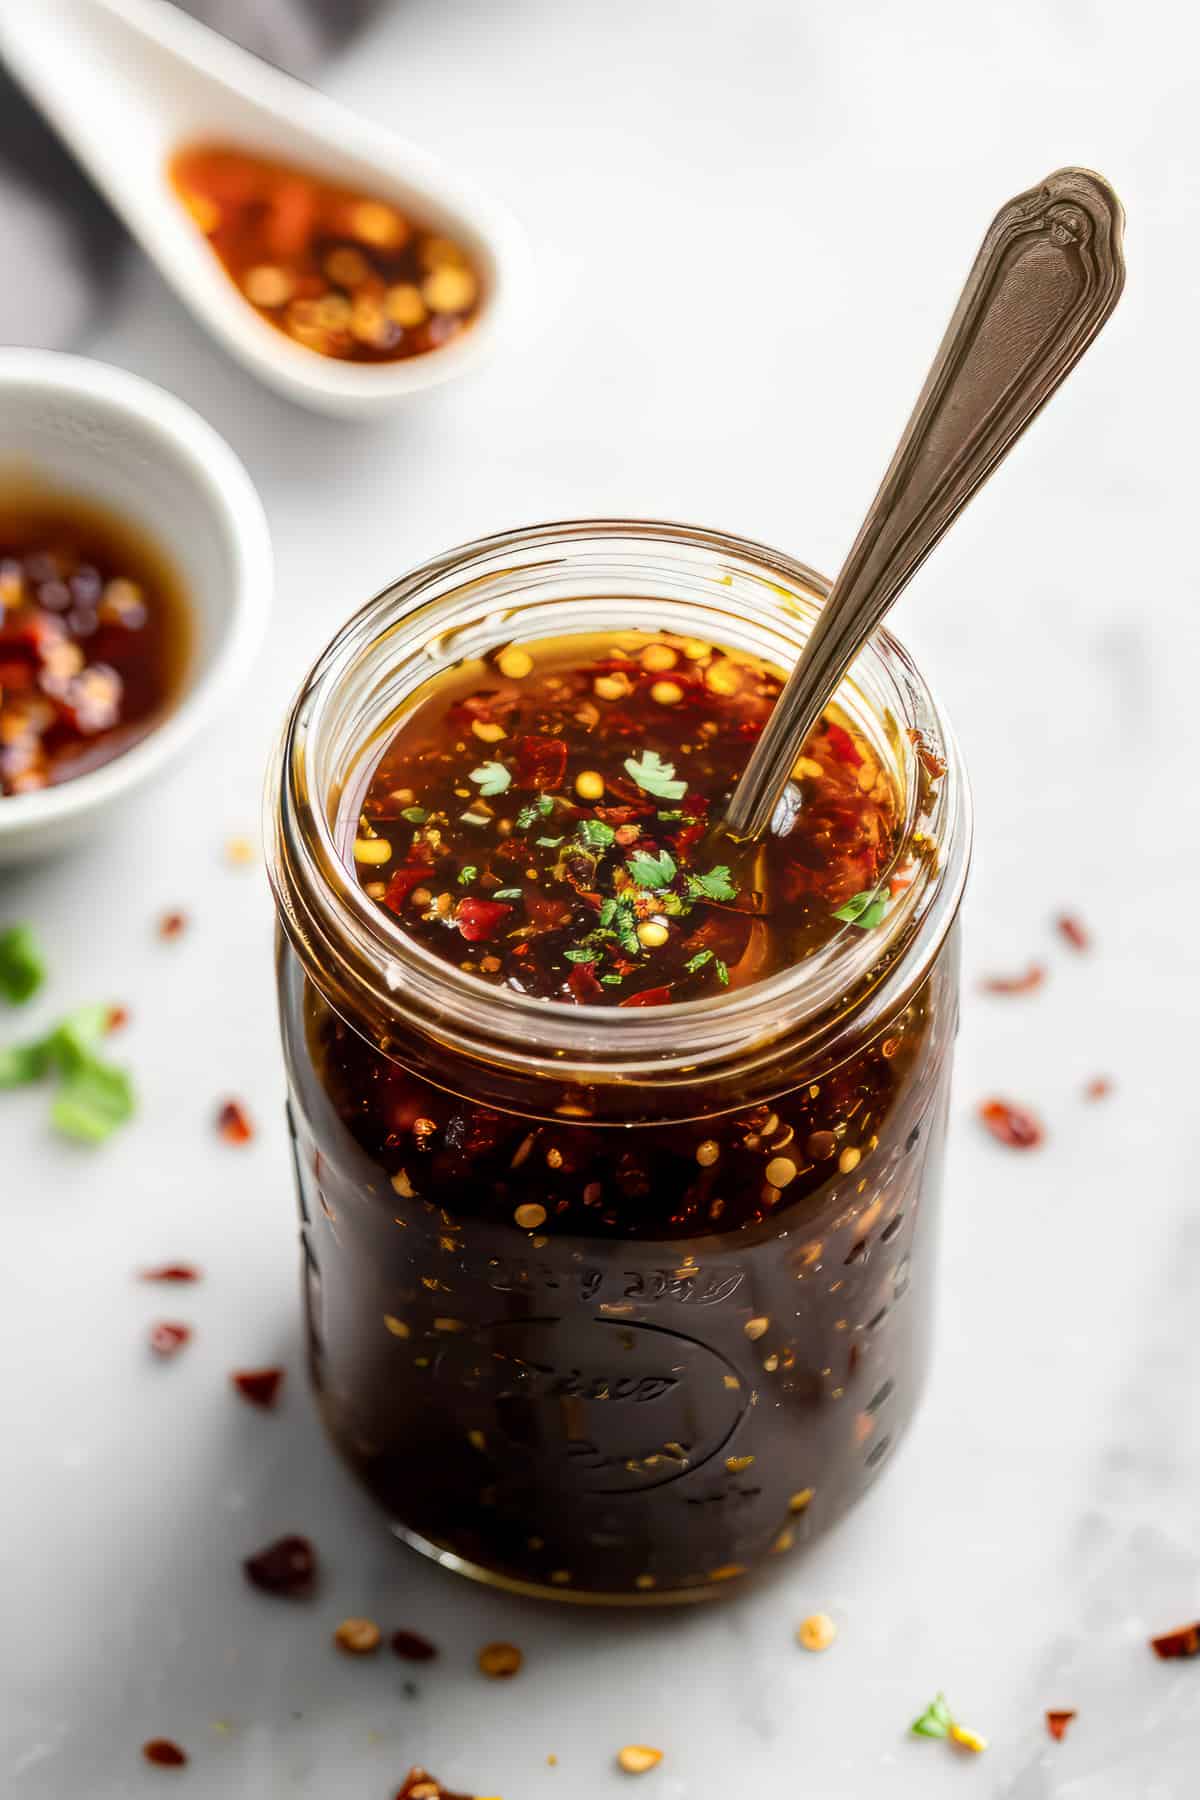 Homemade honey garlic sauce in a jar with a spoon.